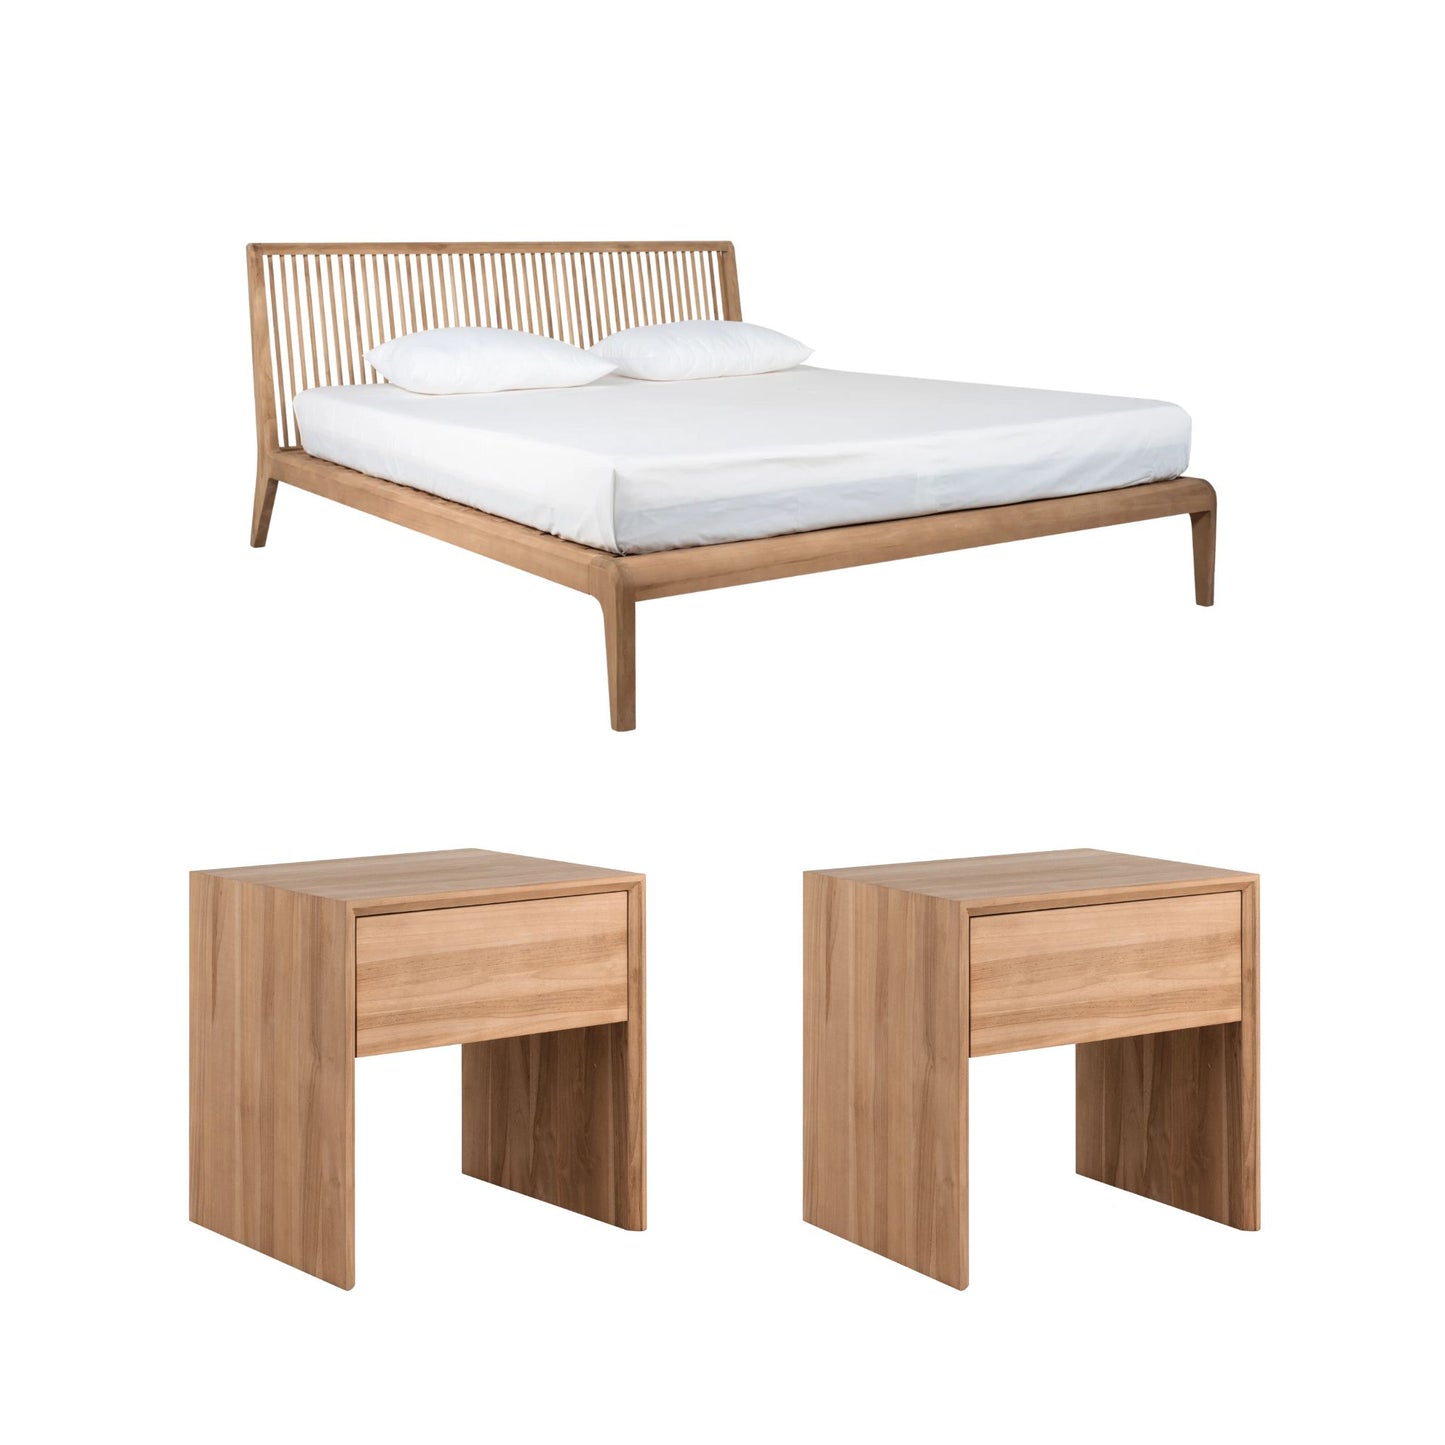 Jodoh Spindle Queen Bed with 2 Bedside Tables Set - Teak